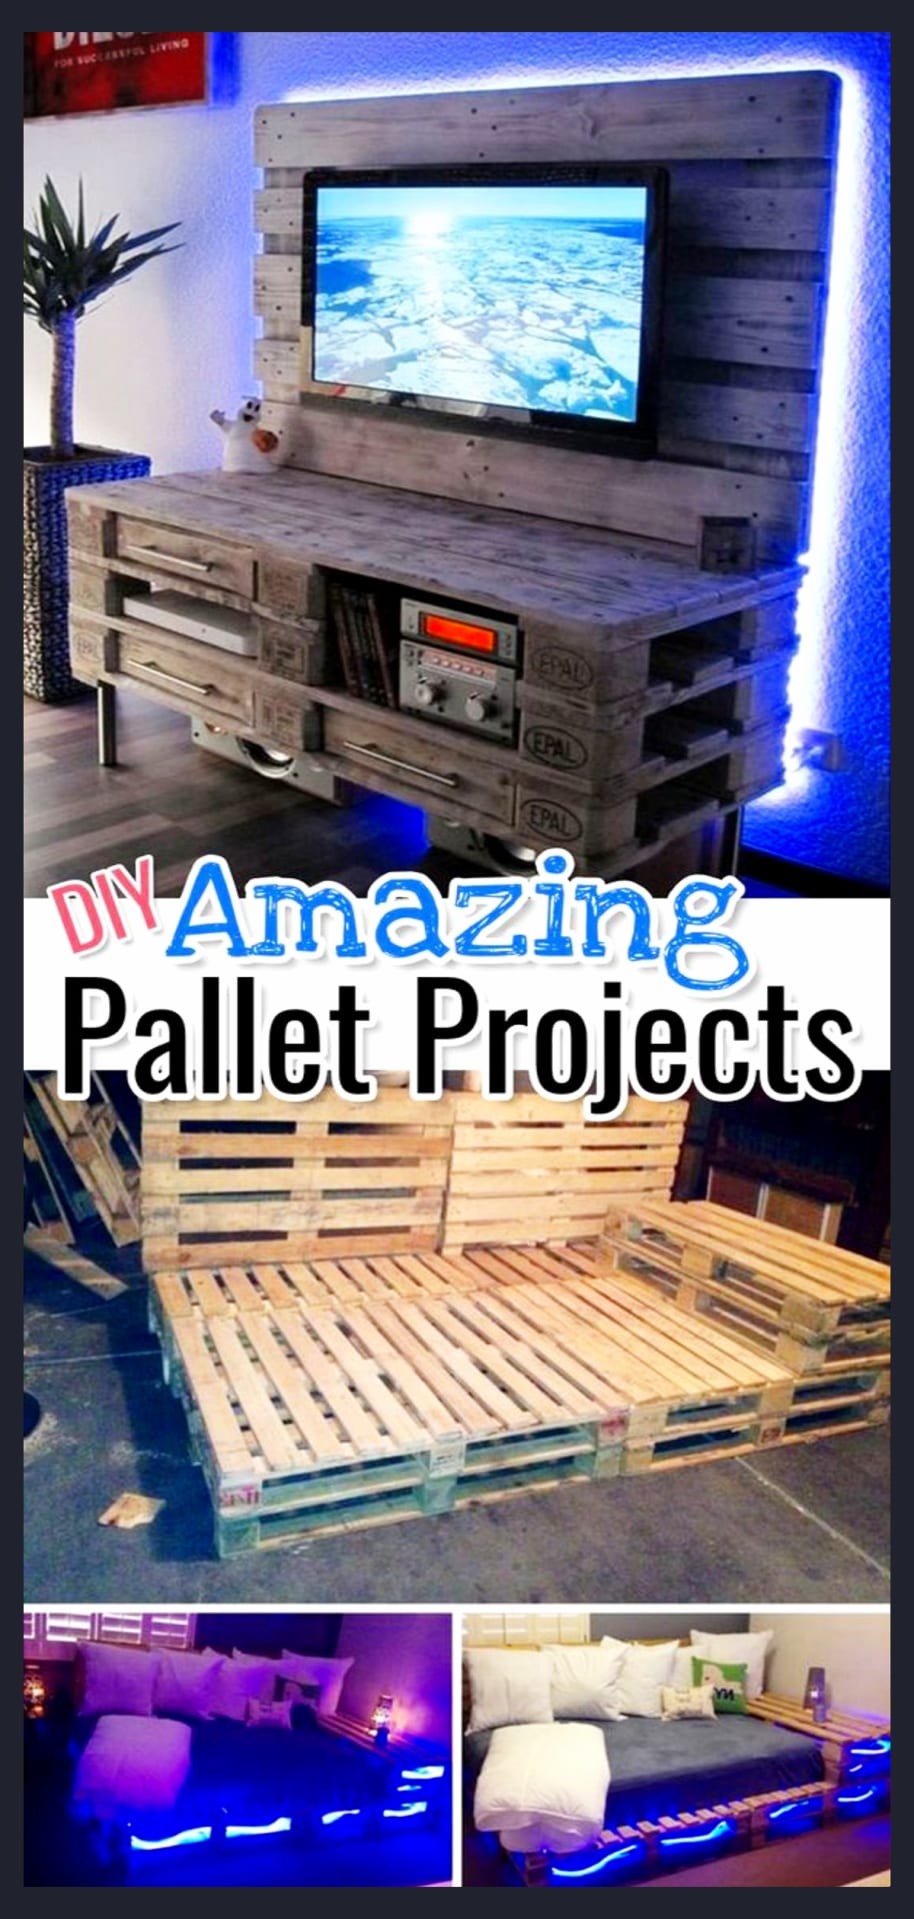 DIY pallet projects - easy furniture pallet projects to make and sell - how to build pallet furniture and more easy pallet projects